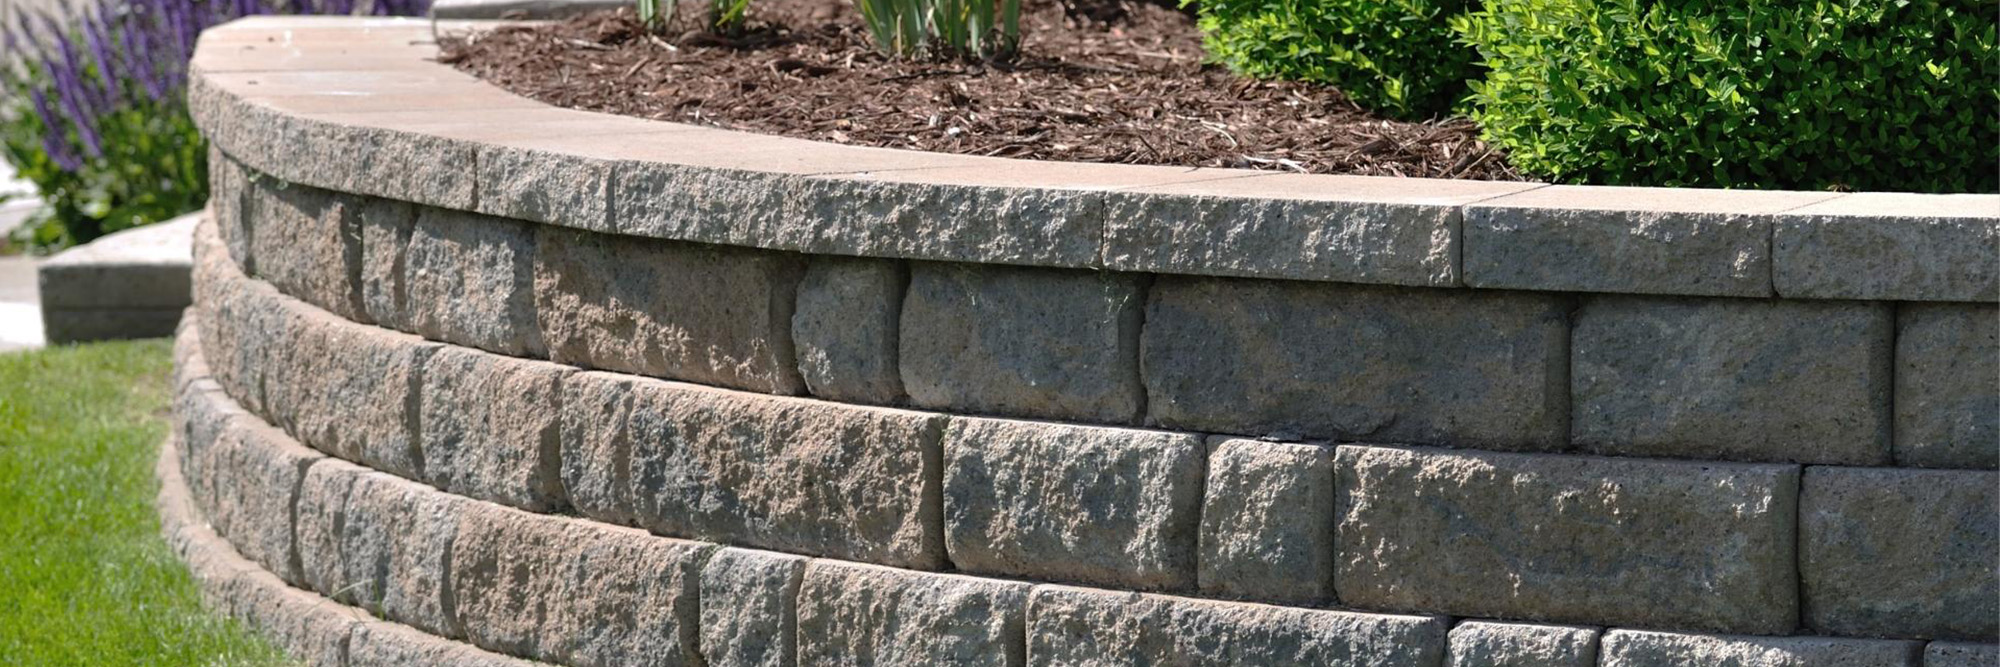 a retaining wall made of blocks in a front yard next to grass